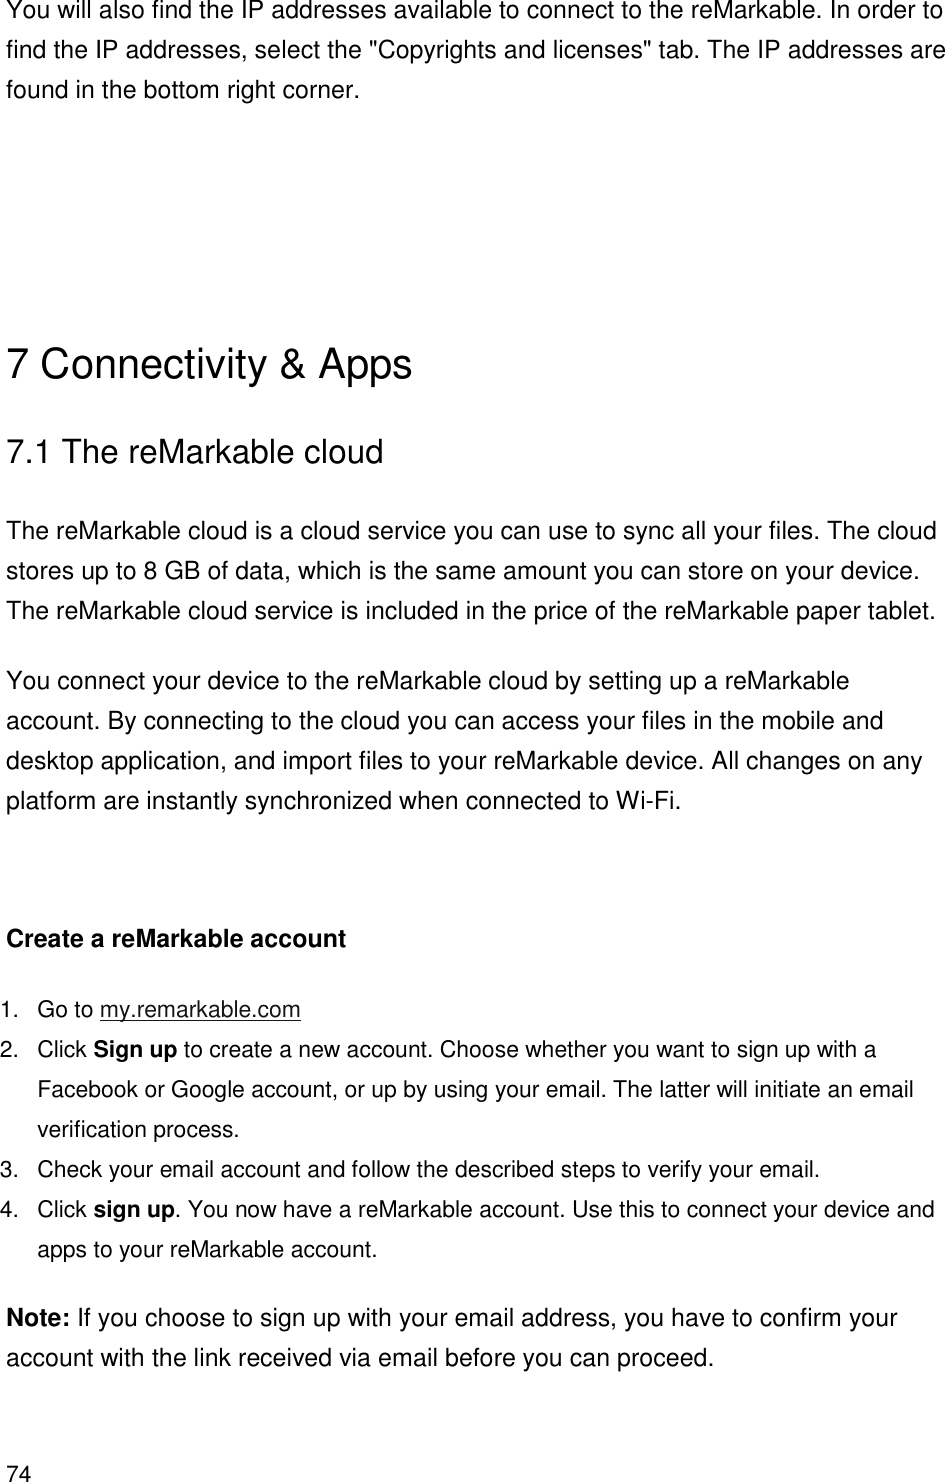 74  You will also find the IP addresses available to connect to the reMarkable. In order to find the IP addresses, select the &quot;Copyrights and licenses&quot; tab. The IP addresses are found in the bottom right corner.    7 Connectivity &amp; Apps 7.1 The reMarkable cloud  The reMarkable cloud is a cloud service you can use to sync all your files. The cloud stores up to 8 GB of data, which is the same amount you can store on your device. The reMarkable cloud service is included in the price of the reMarkable paper tablet. You connect your device to the reMarkable cloud by setting up a reMarkable account. By connecting to the cloud you can access your files in the mobile and desktop application, and import files to your reMarkable device. All changes on any platform are instantly synchronized when connected to Wi-Fi.   Create a reMarkable account 1.  Go to my.remarkable.com 2.  Click Sign up to create a new account. Choose whether you want to sign up with a Facebook or Google account, or up by using your email. The latter will initiate an email verification process. 3.  Check your email account and follow the described steps to verify your email. 4.  Click sign up. You now have a reMarkable account. Use this to connect your device and apps to your reMarkable account. Note: If you choose to sign up with your email address, you have to confirm your account with the link received via email before you can proceed.  